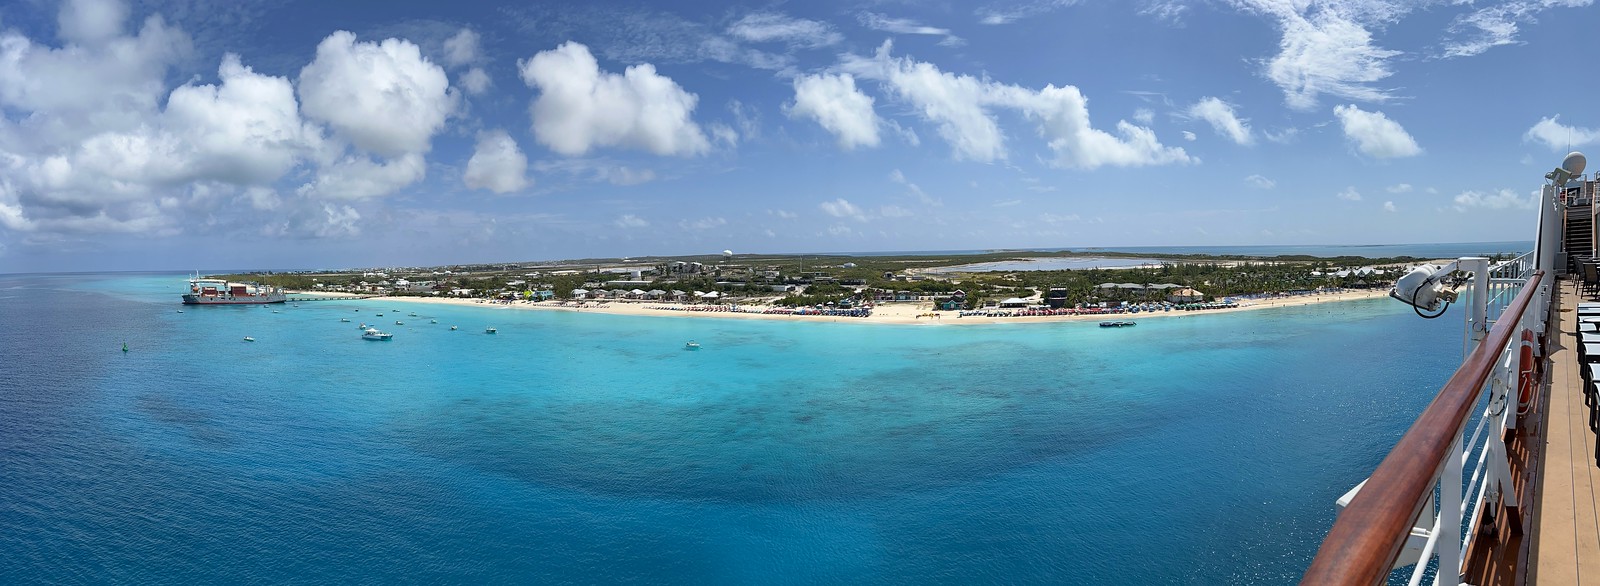 Panorama of the beach and island behind